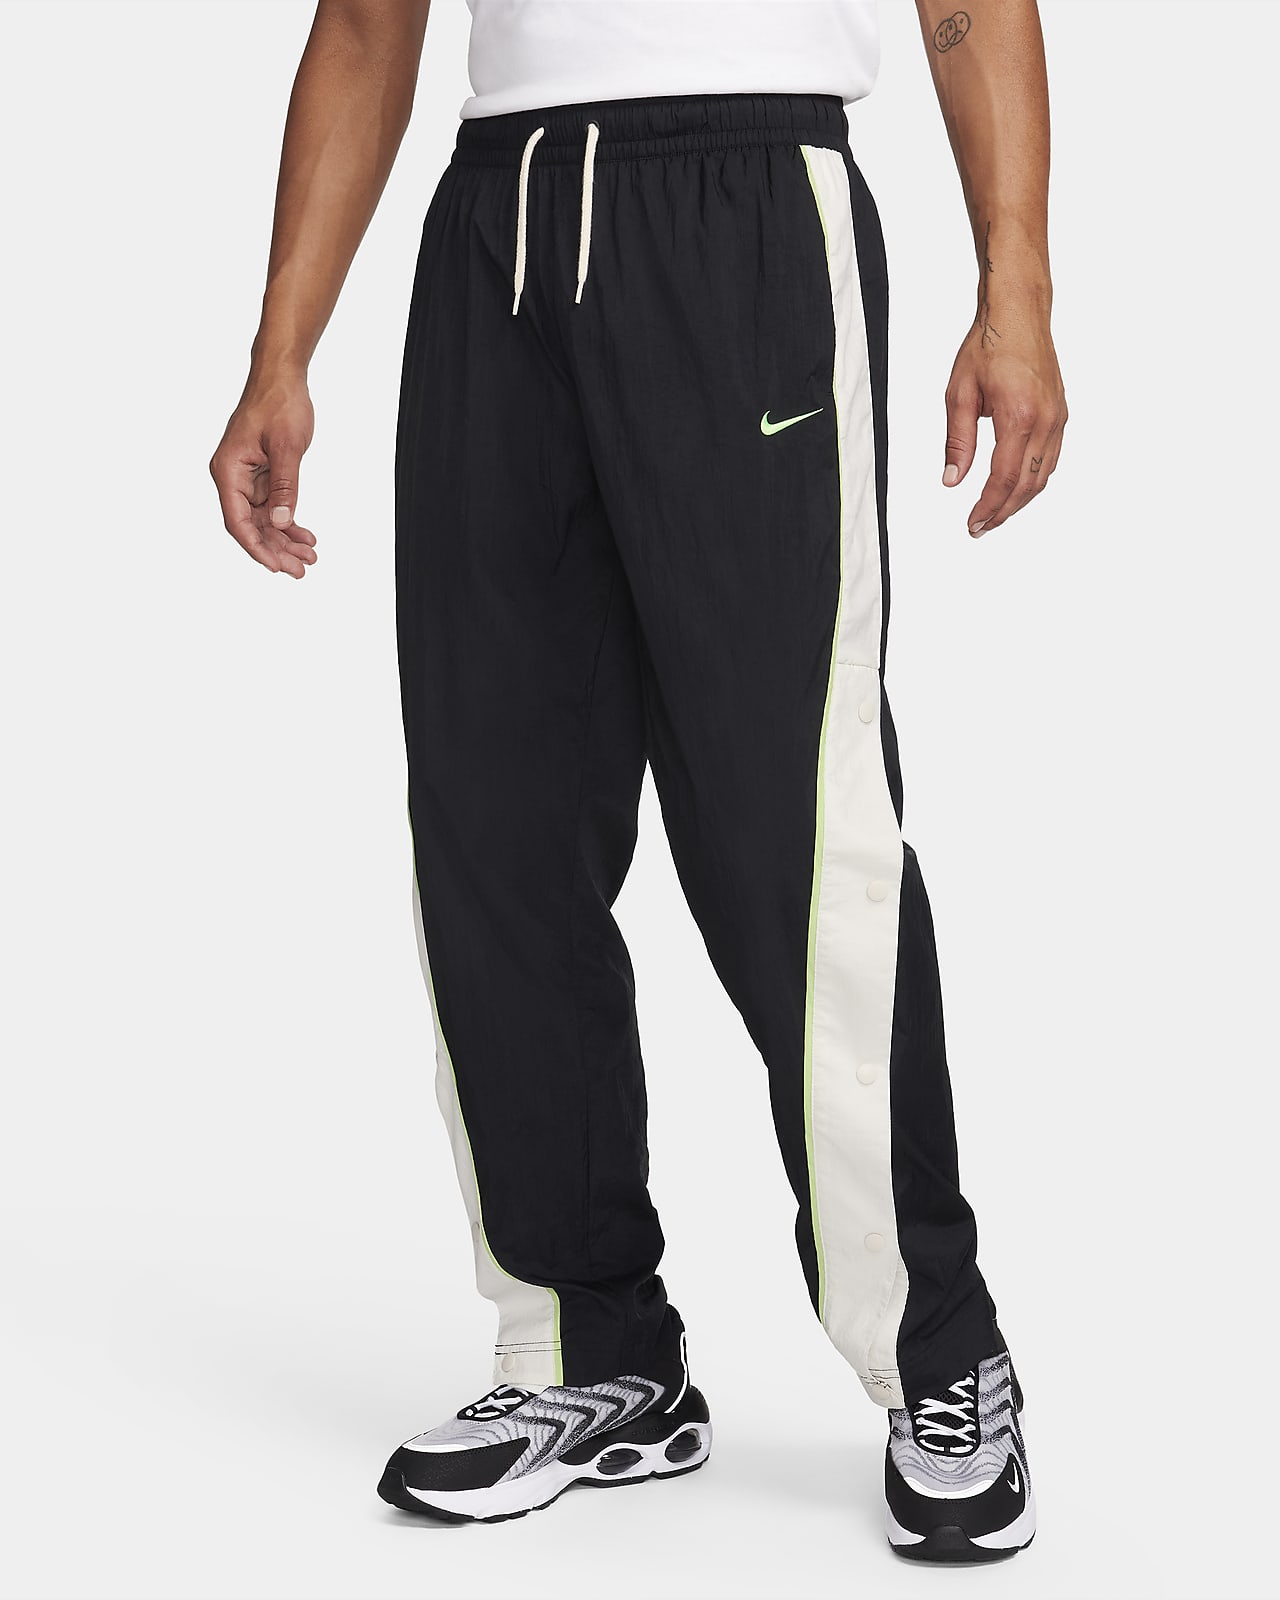 Buy Nike's Snap Button Track Pants in Black